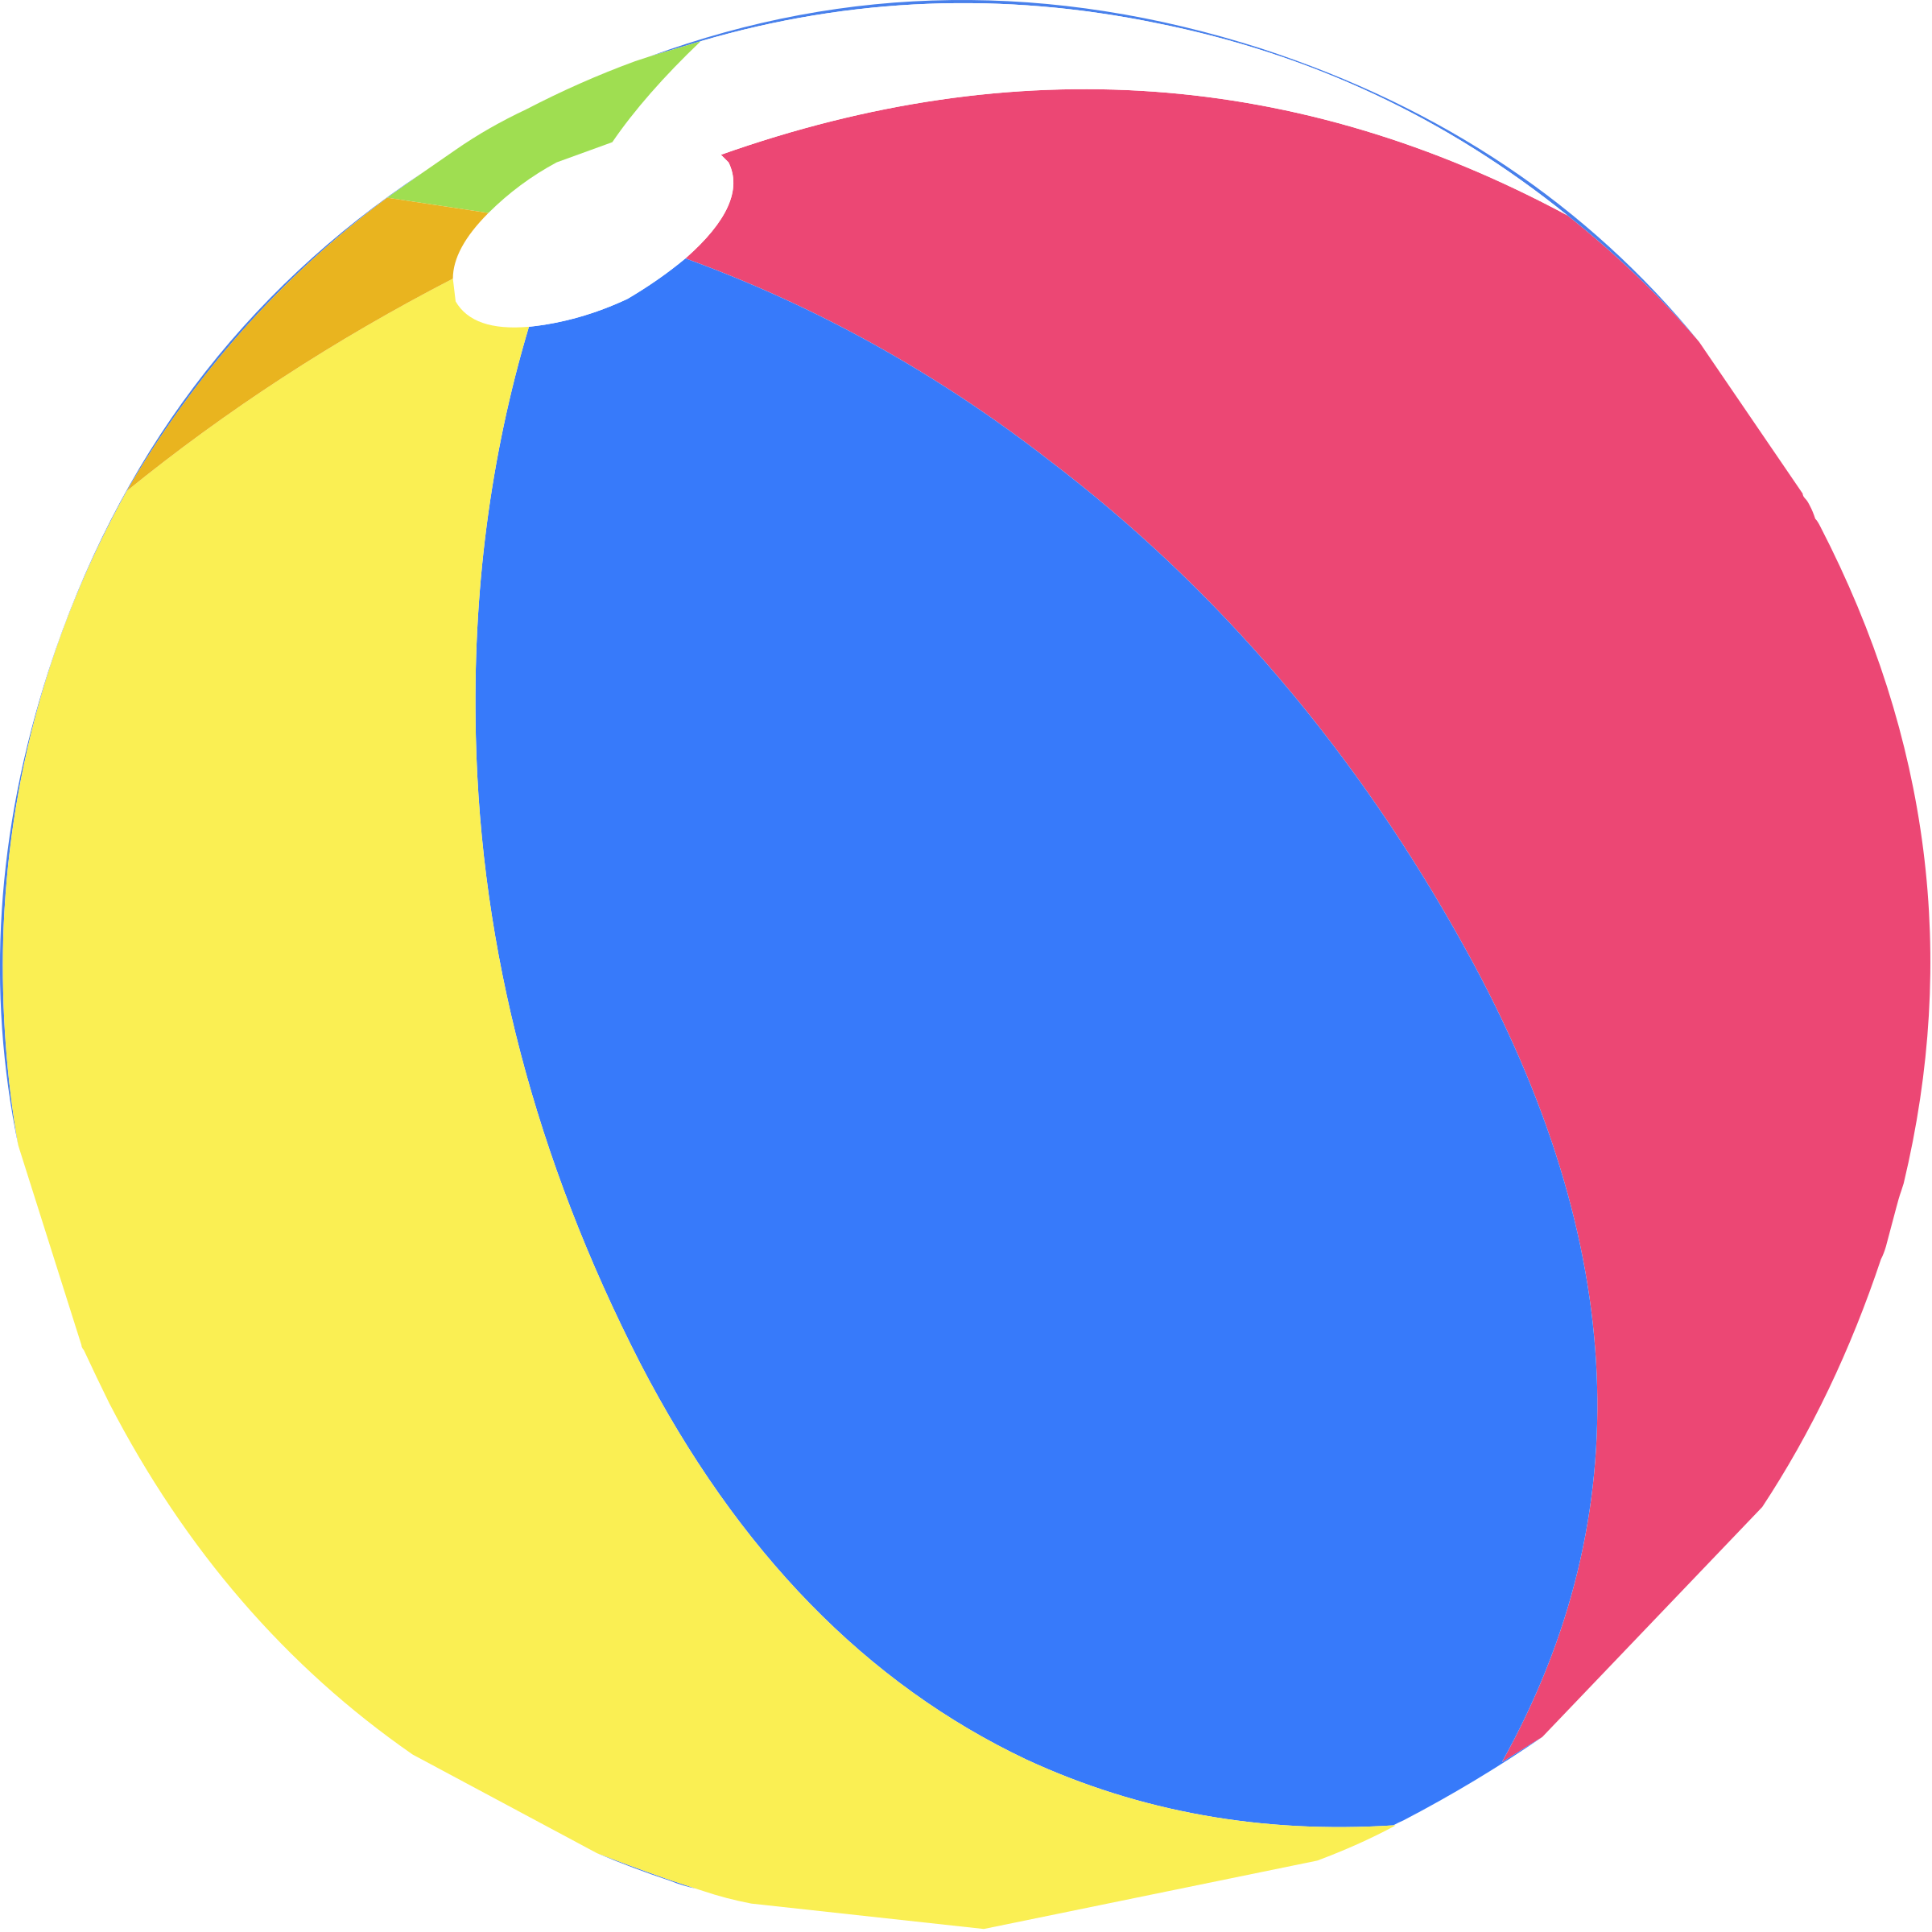 Free beach ball clipart free clip art images image